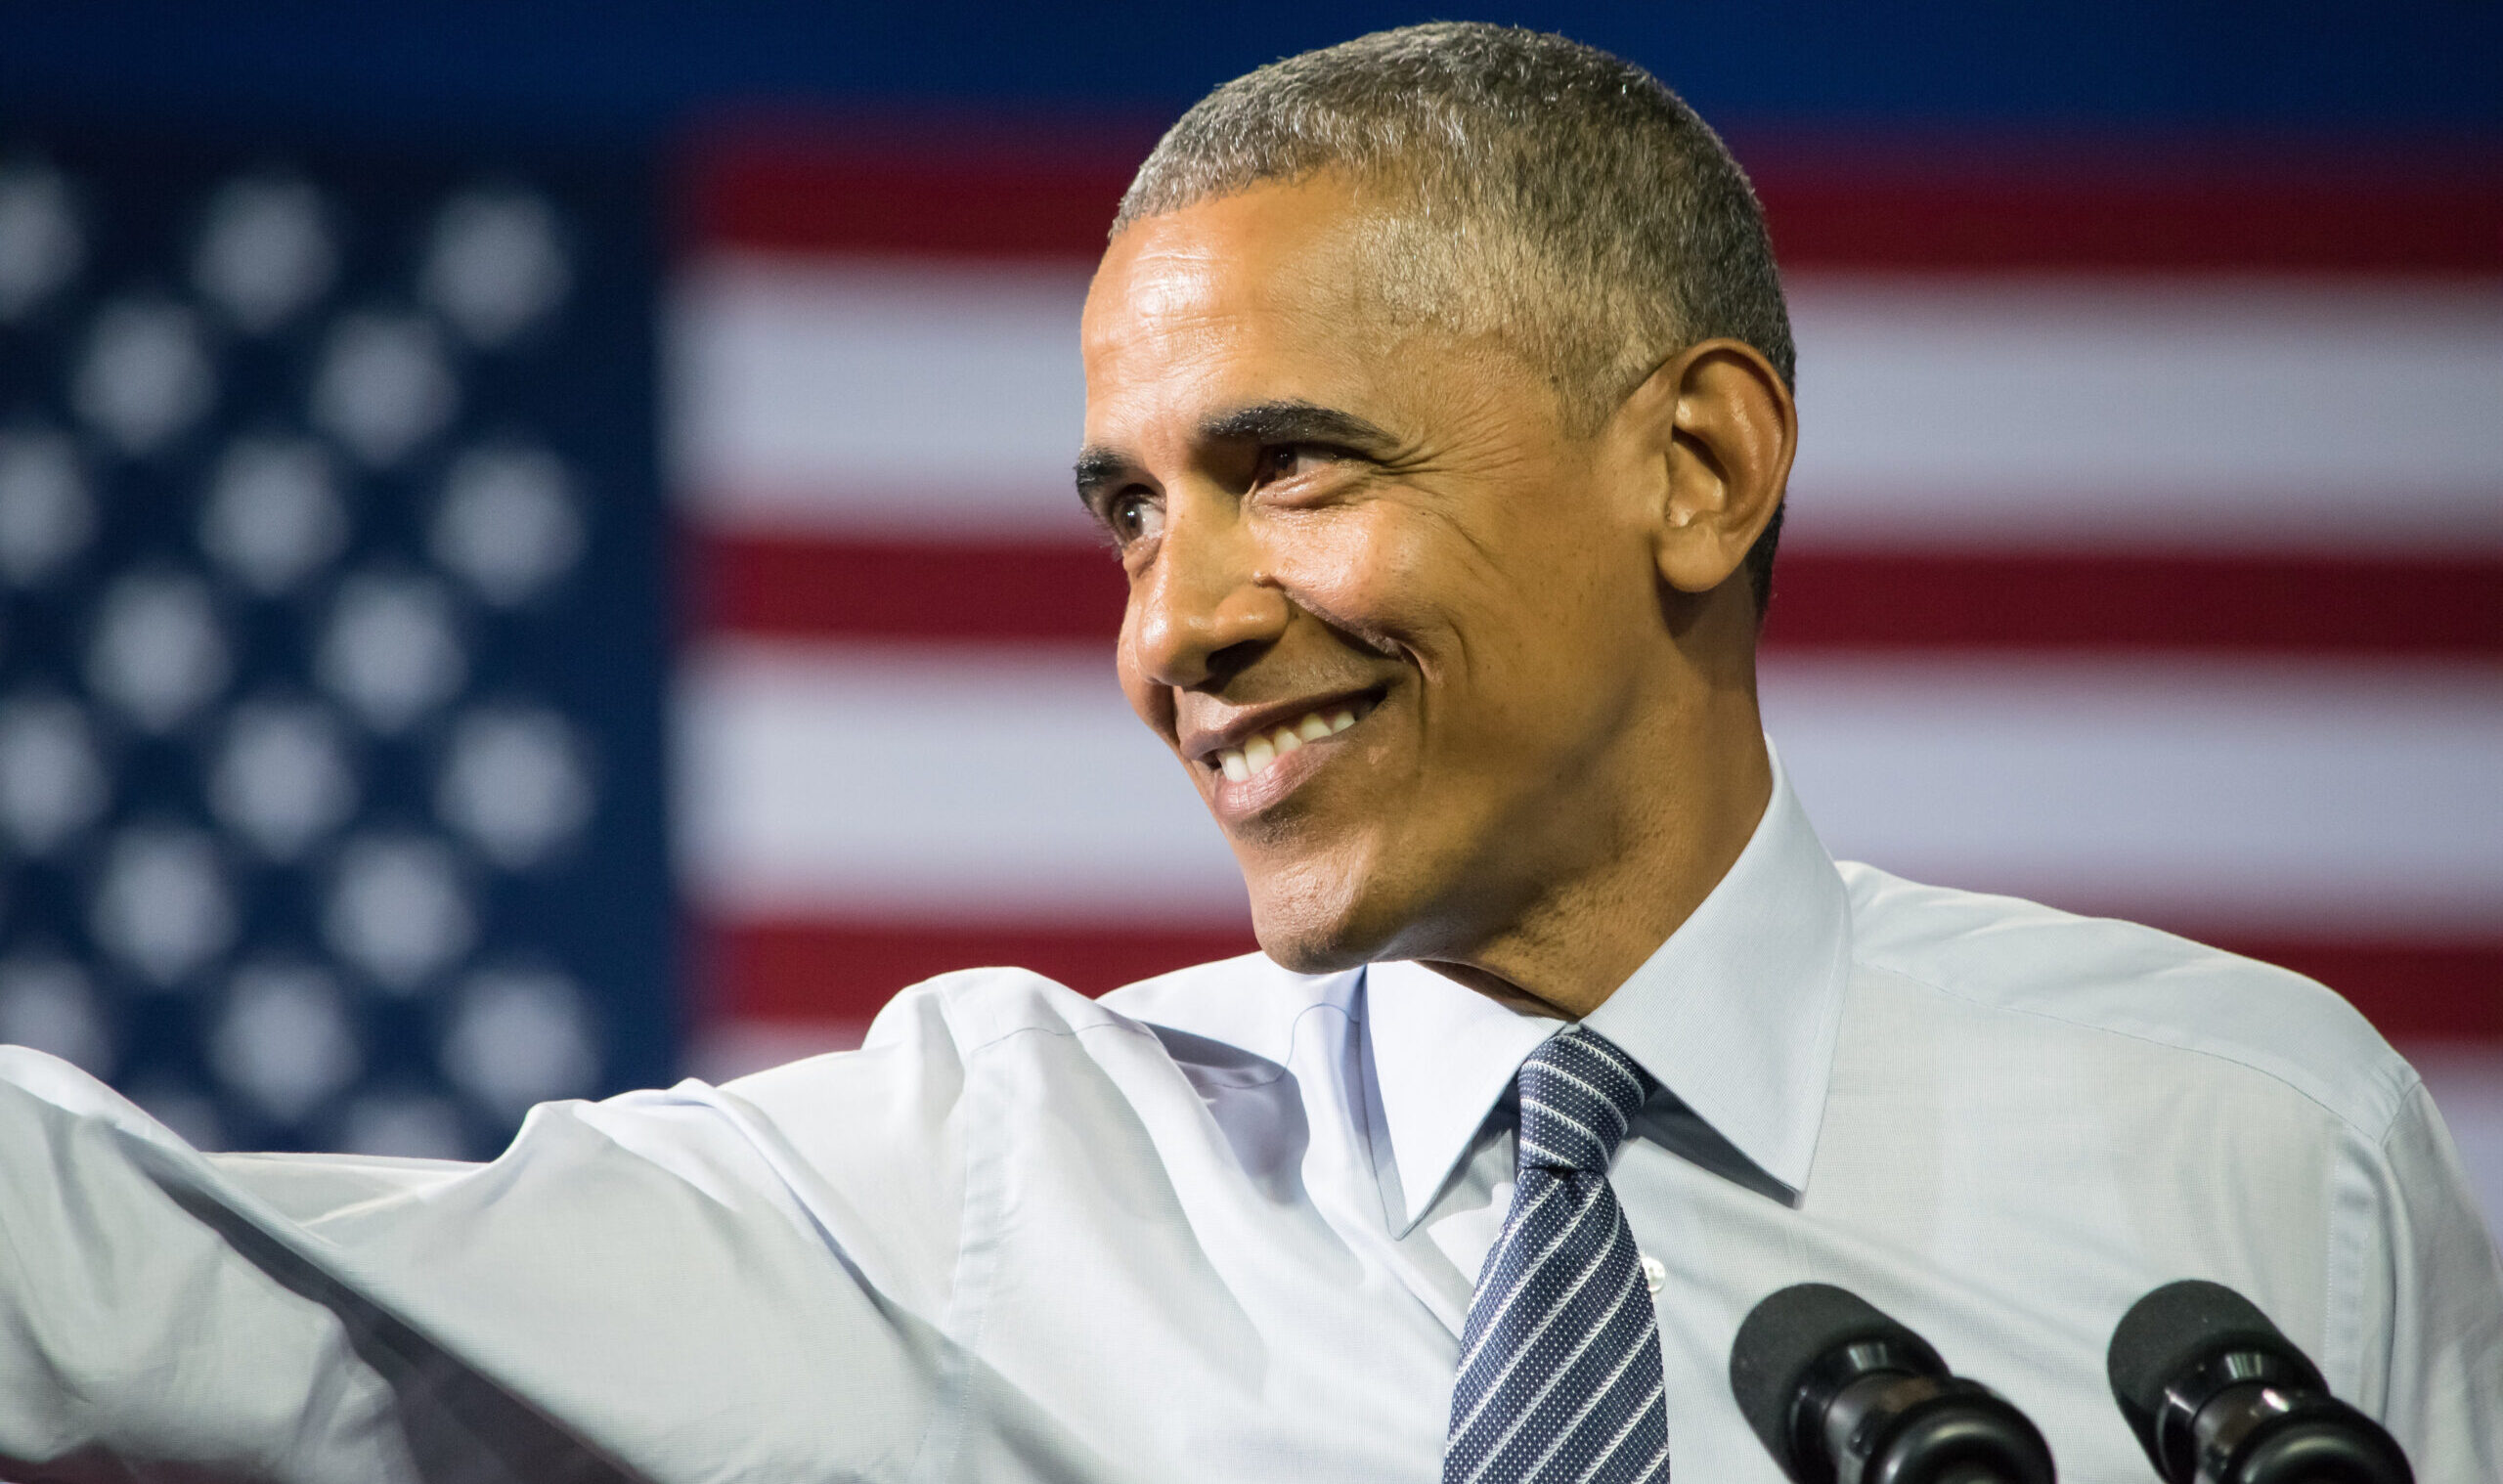 Barack Obama Would Be Perfect for Harvard, Actually